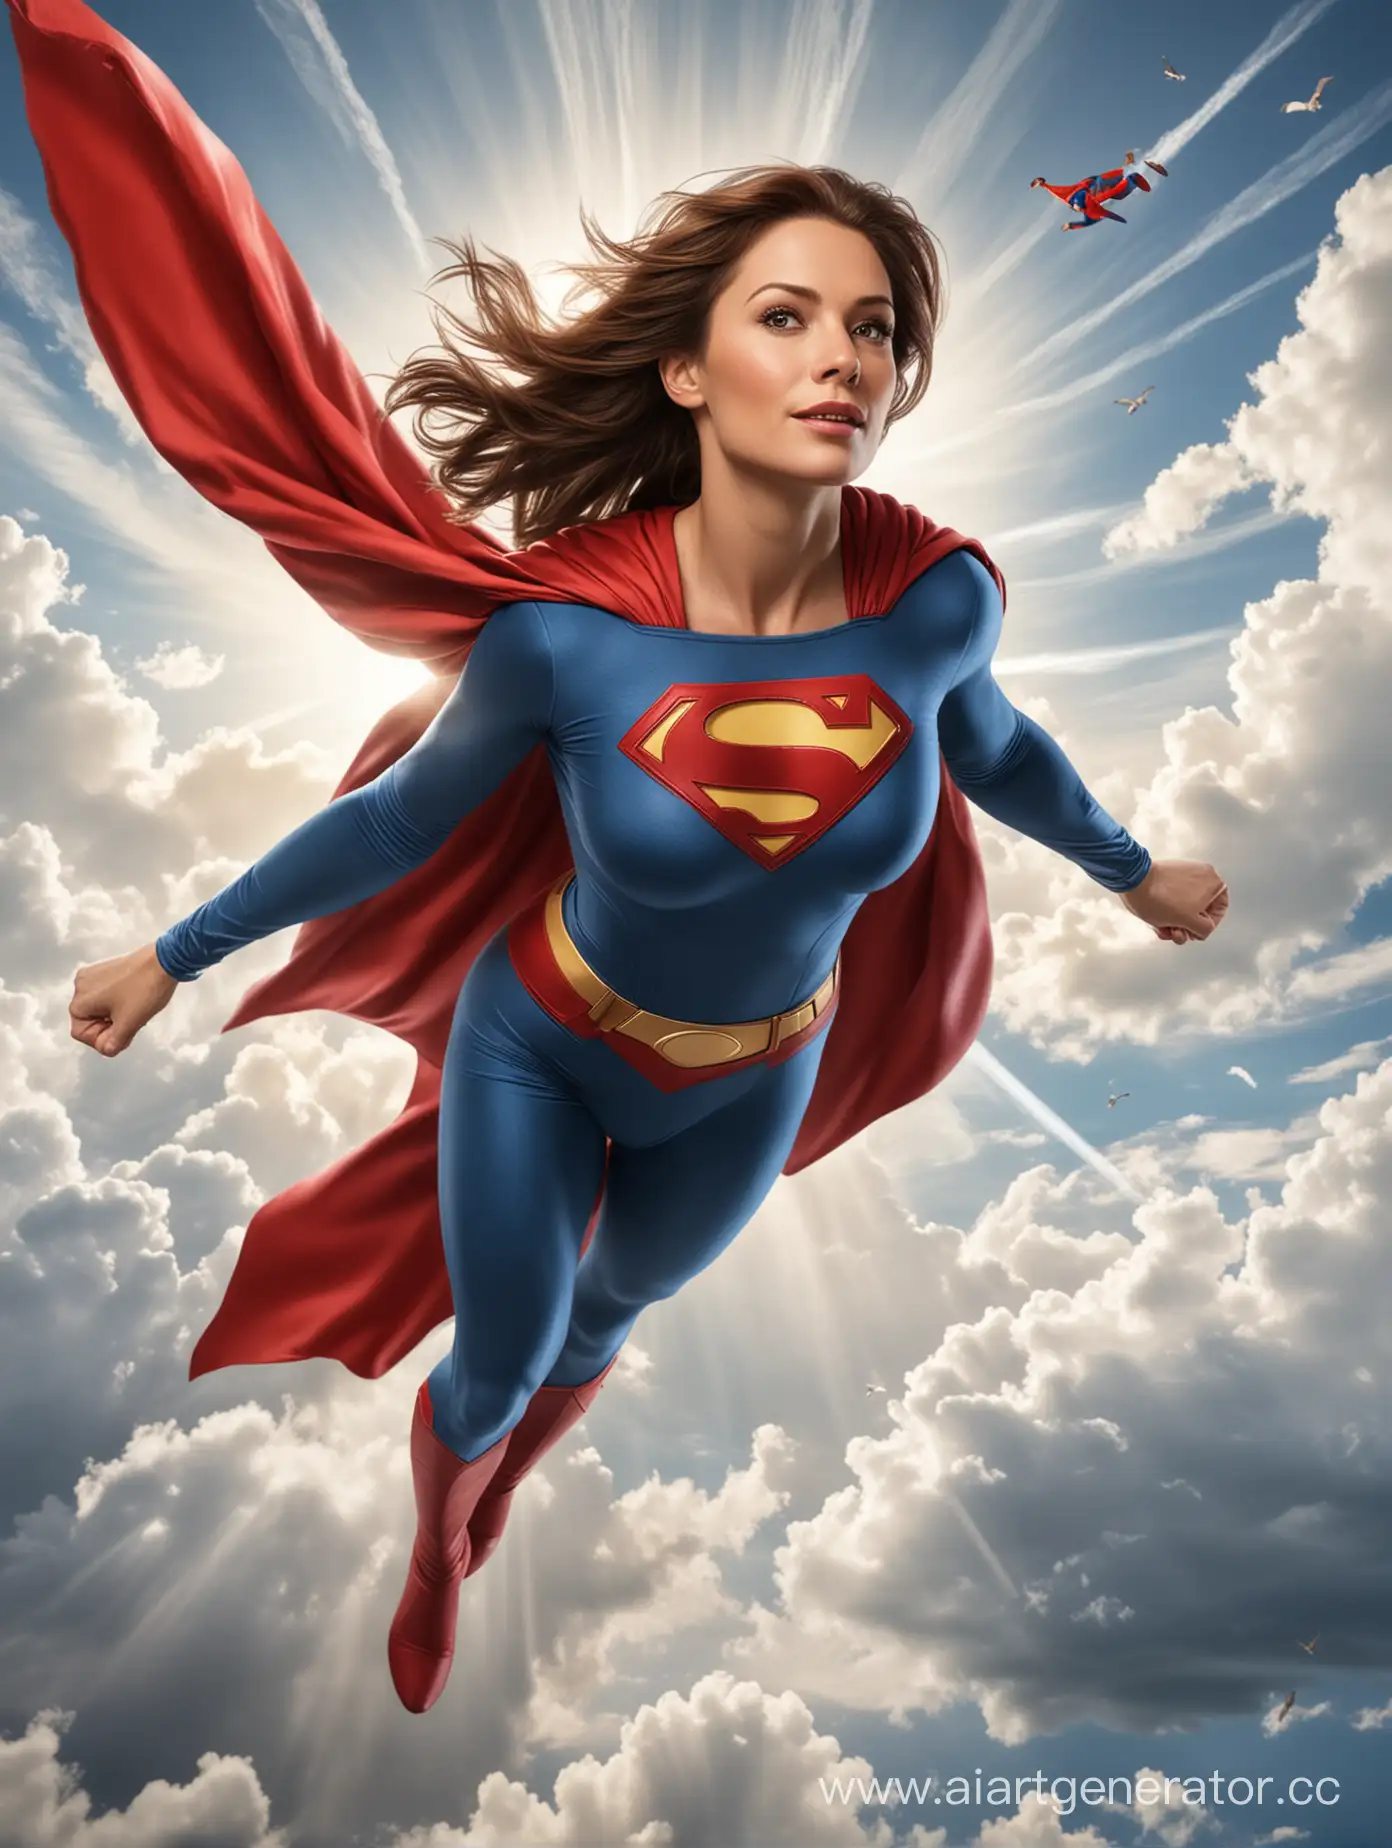 A beautiful woman with brown hair, age 40, She is flying through the sky like Superman, she is wearing the classic Superman costume